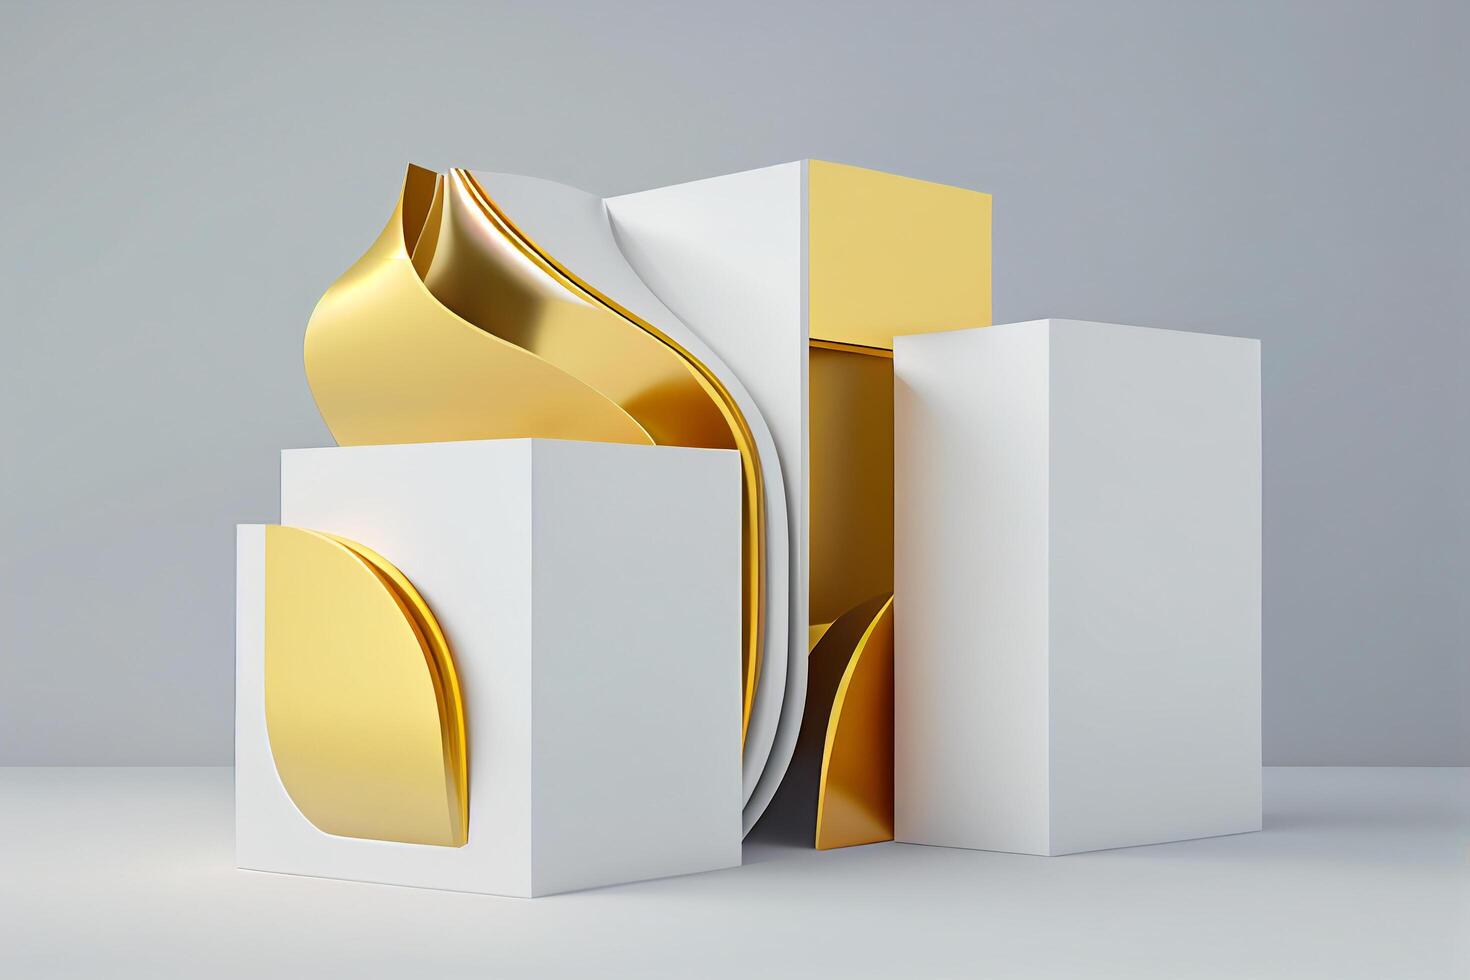 3d abstract podium minimal geometric white and gold background photo